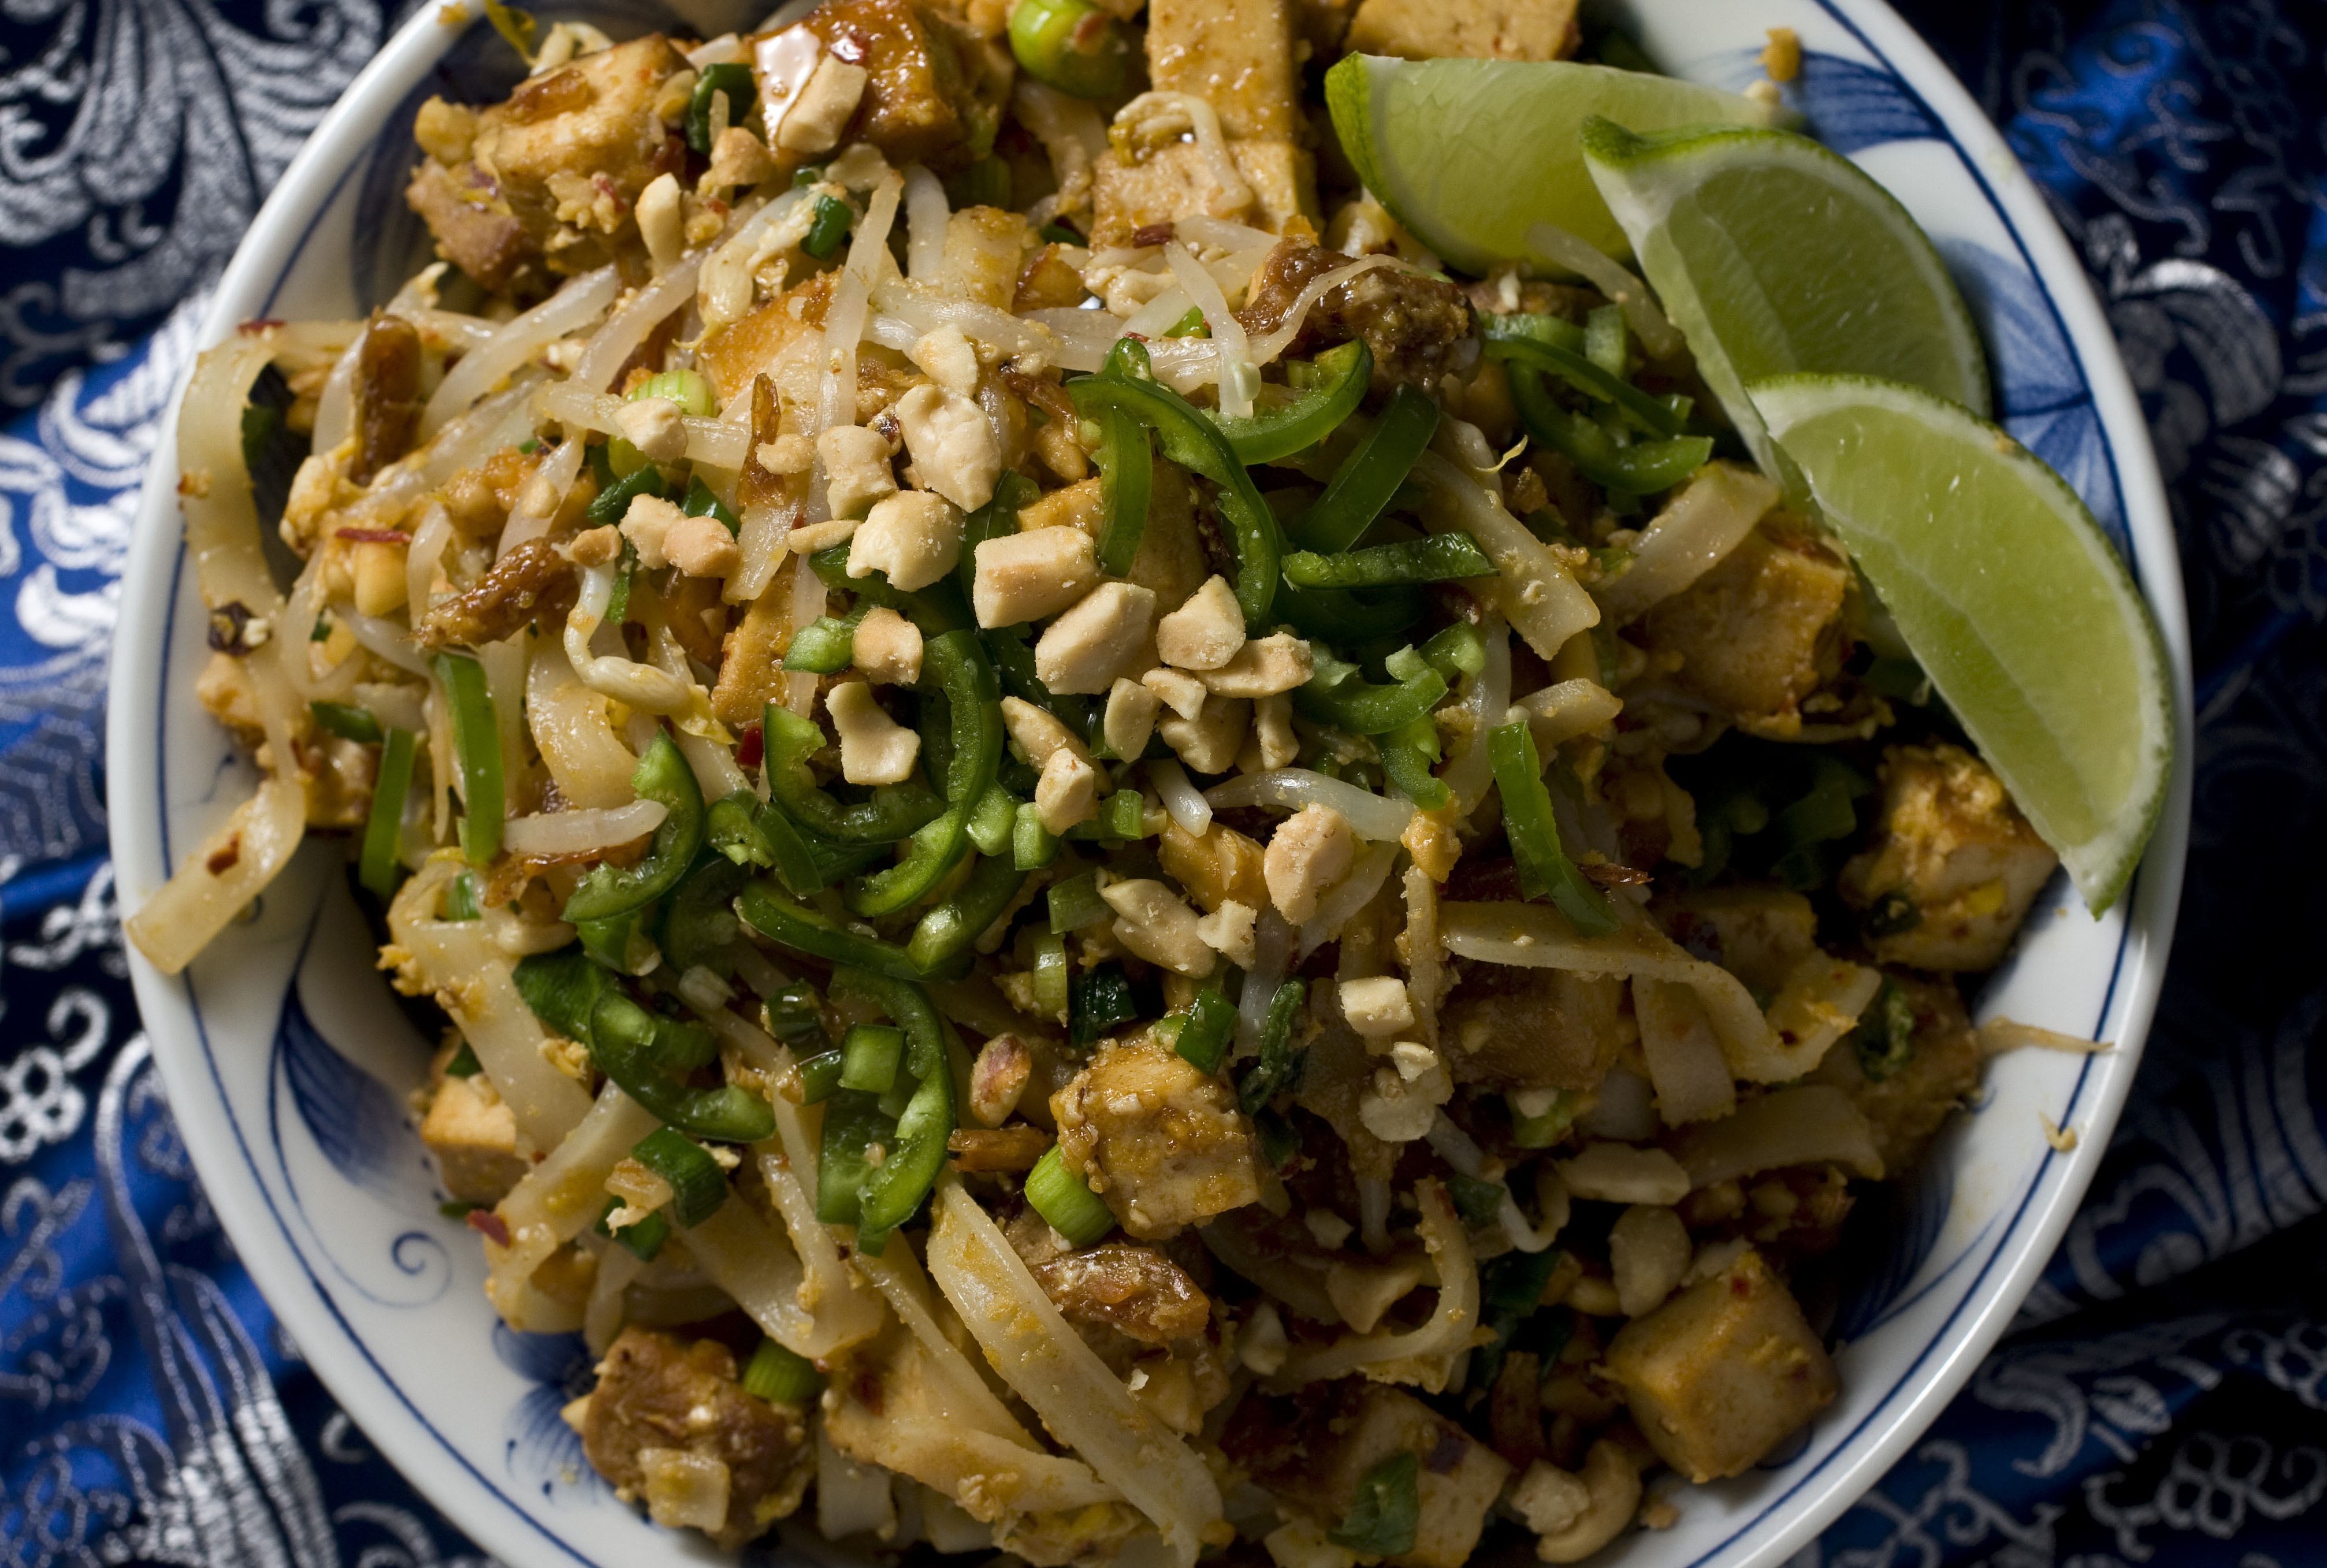 How Thai food became so popular in the US — and how today’s chefs are going beyond pad thai